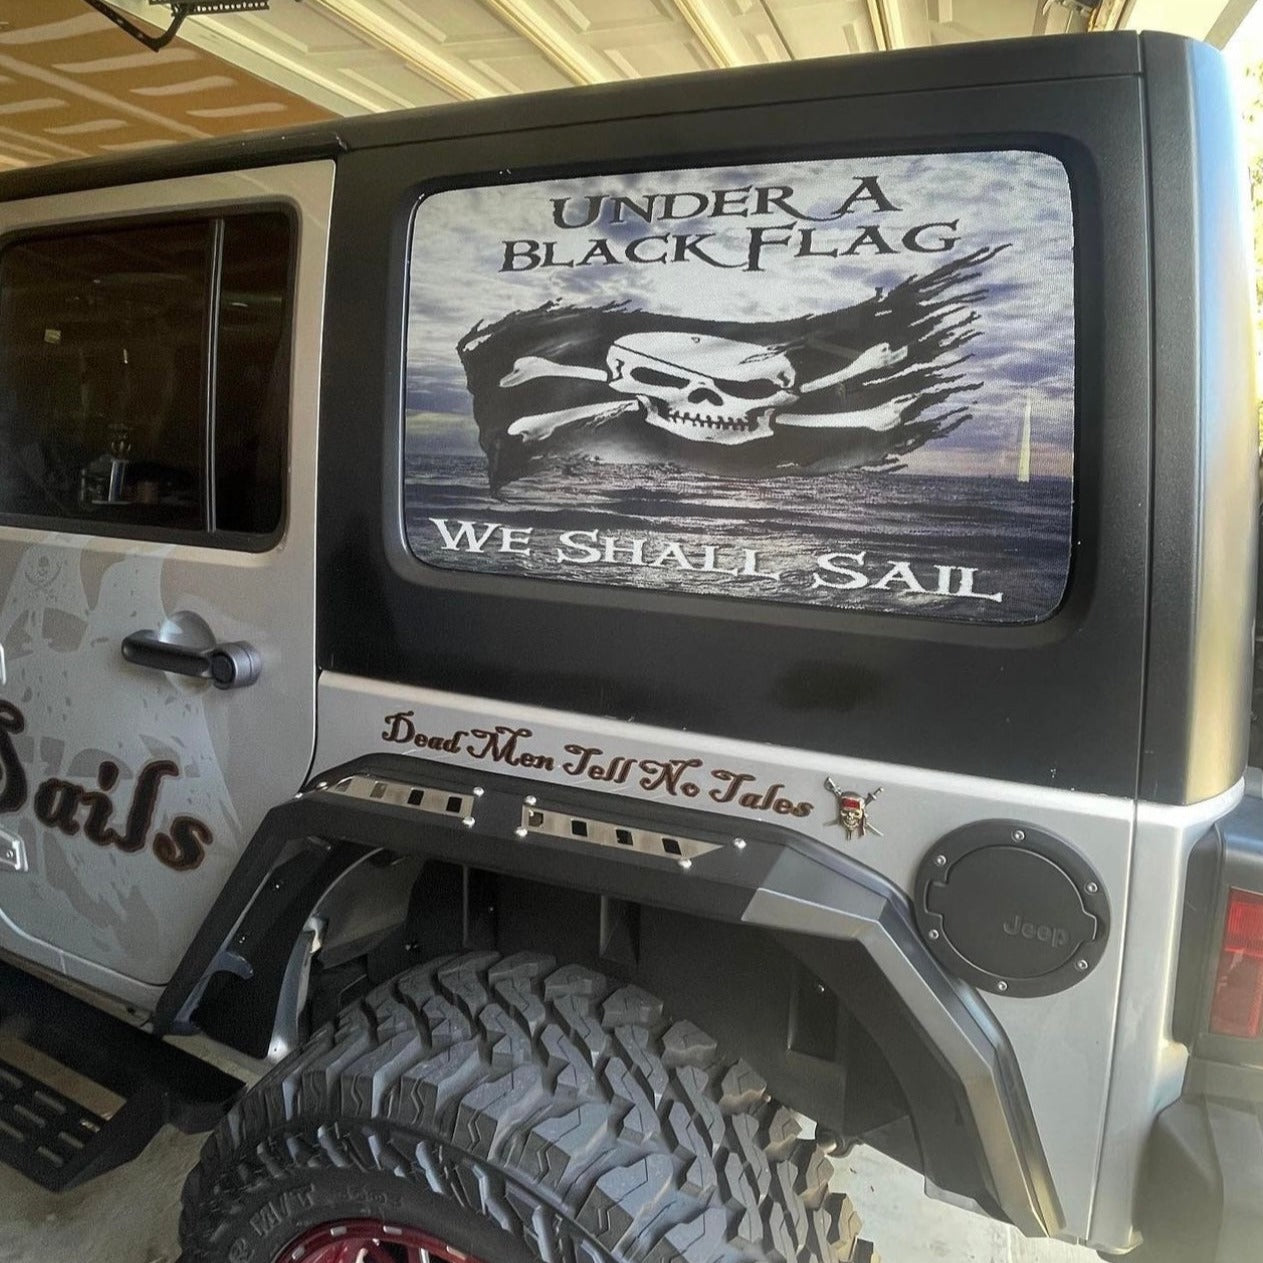 Pirate Jeep Wrangler window decal with a skull and cross bones priate flag and the words under a black flag we shall sail.